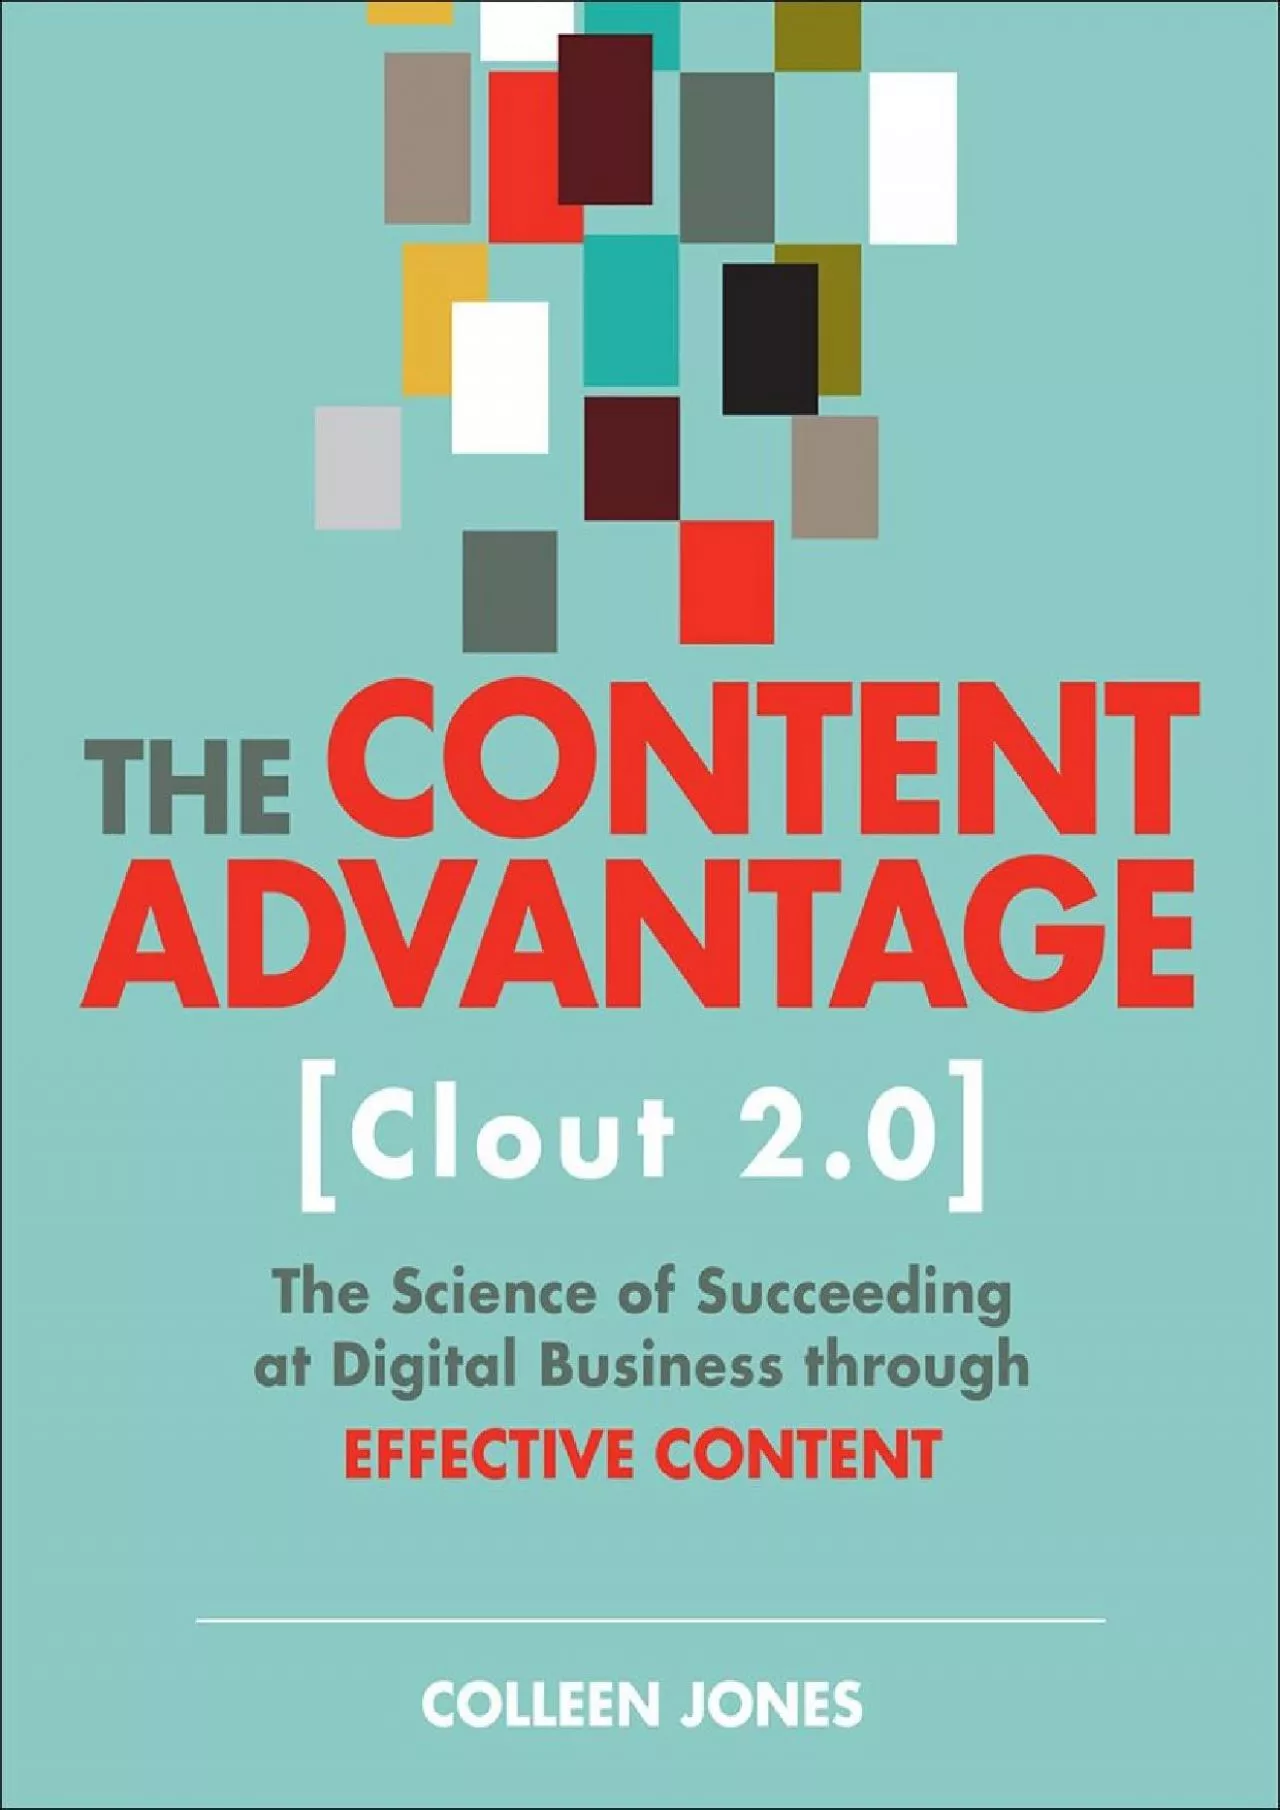 (EBOOK)-Content Advantage (Clout 2.0), The: The Science of Succeeding at Digital Business